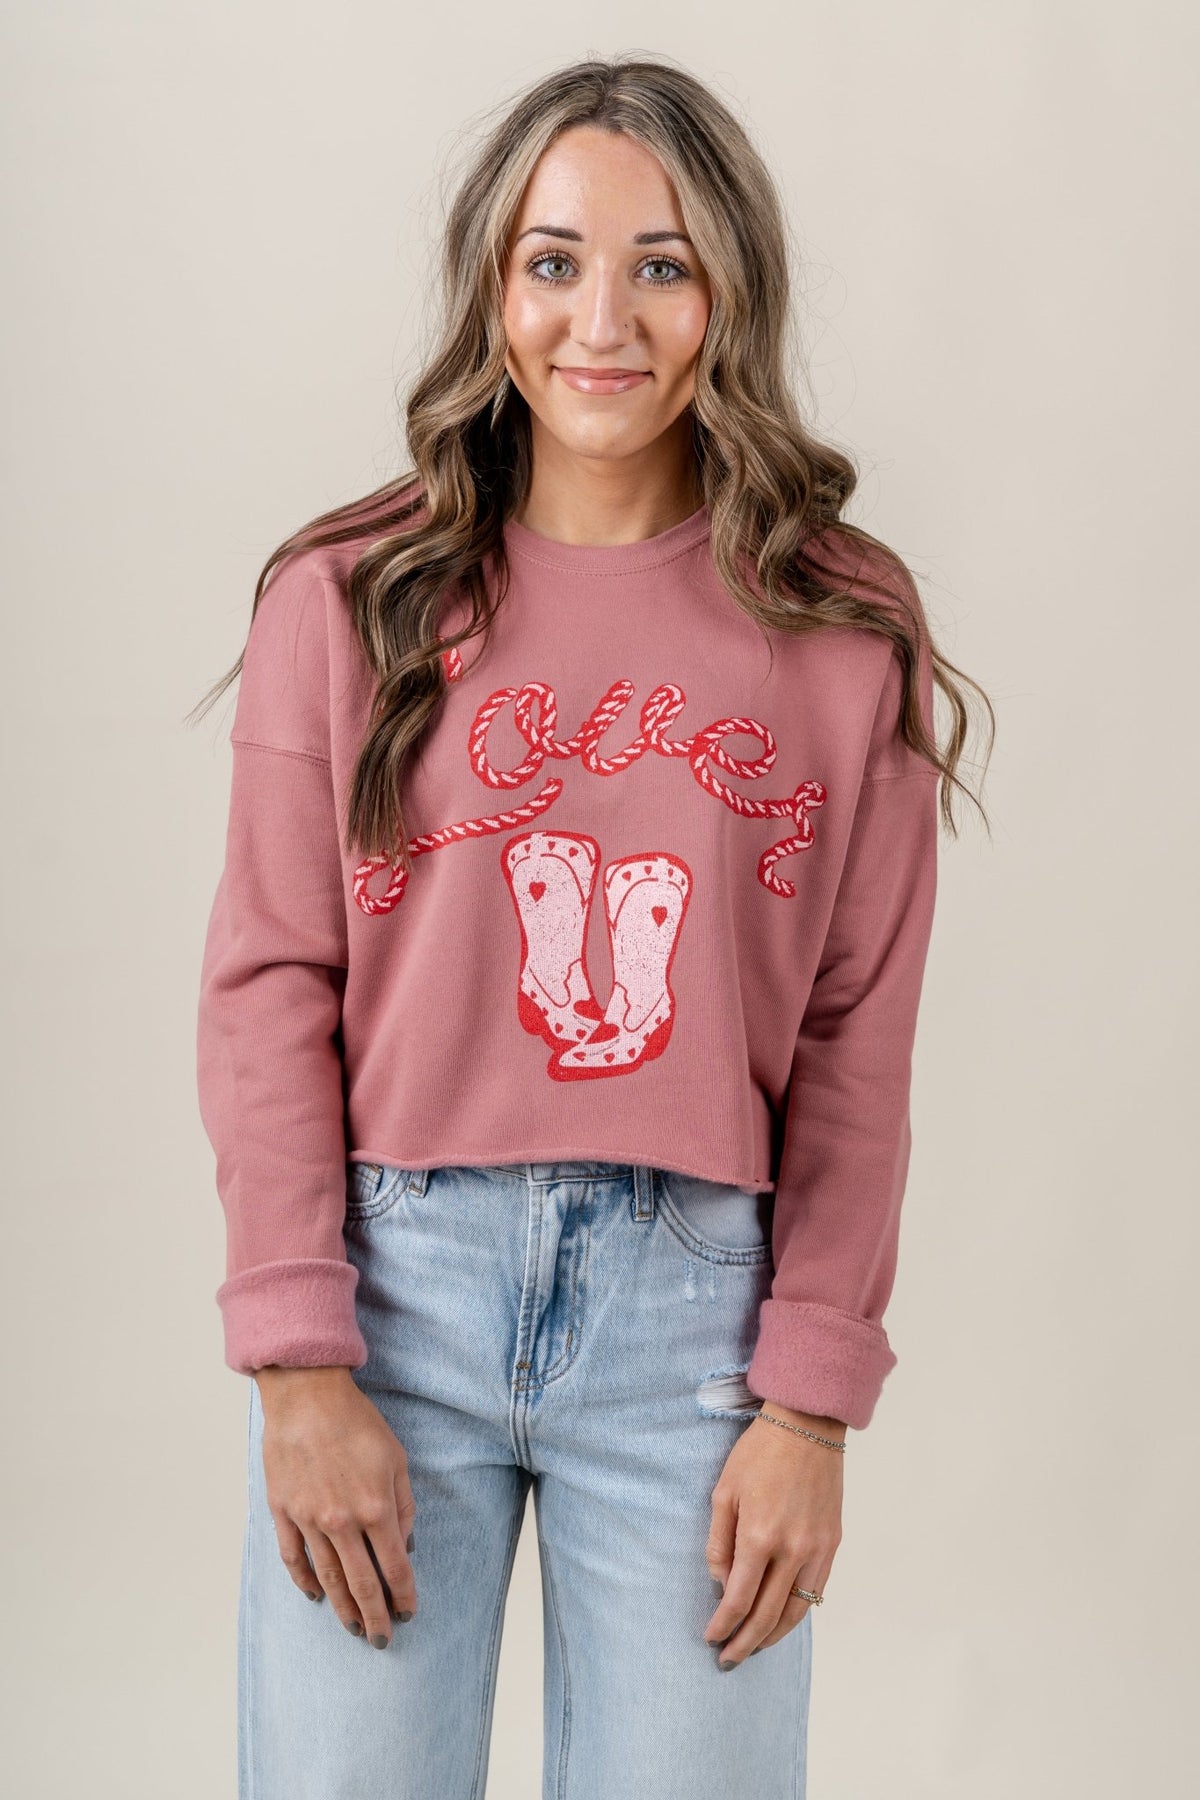 Lover cowboy boot cropped sweatshirt mauve - Trendy T-Shirts for Valentine's Day at Lush Fashion Lounge Boutique in Oklahoma City